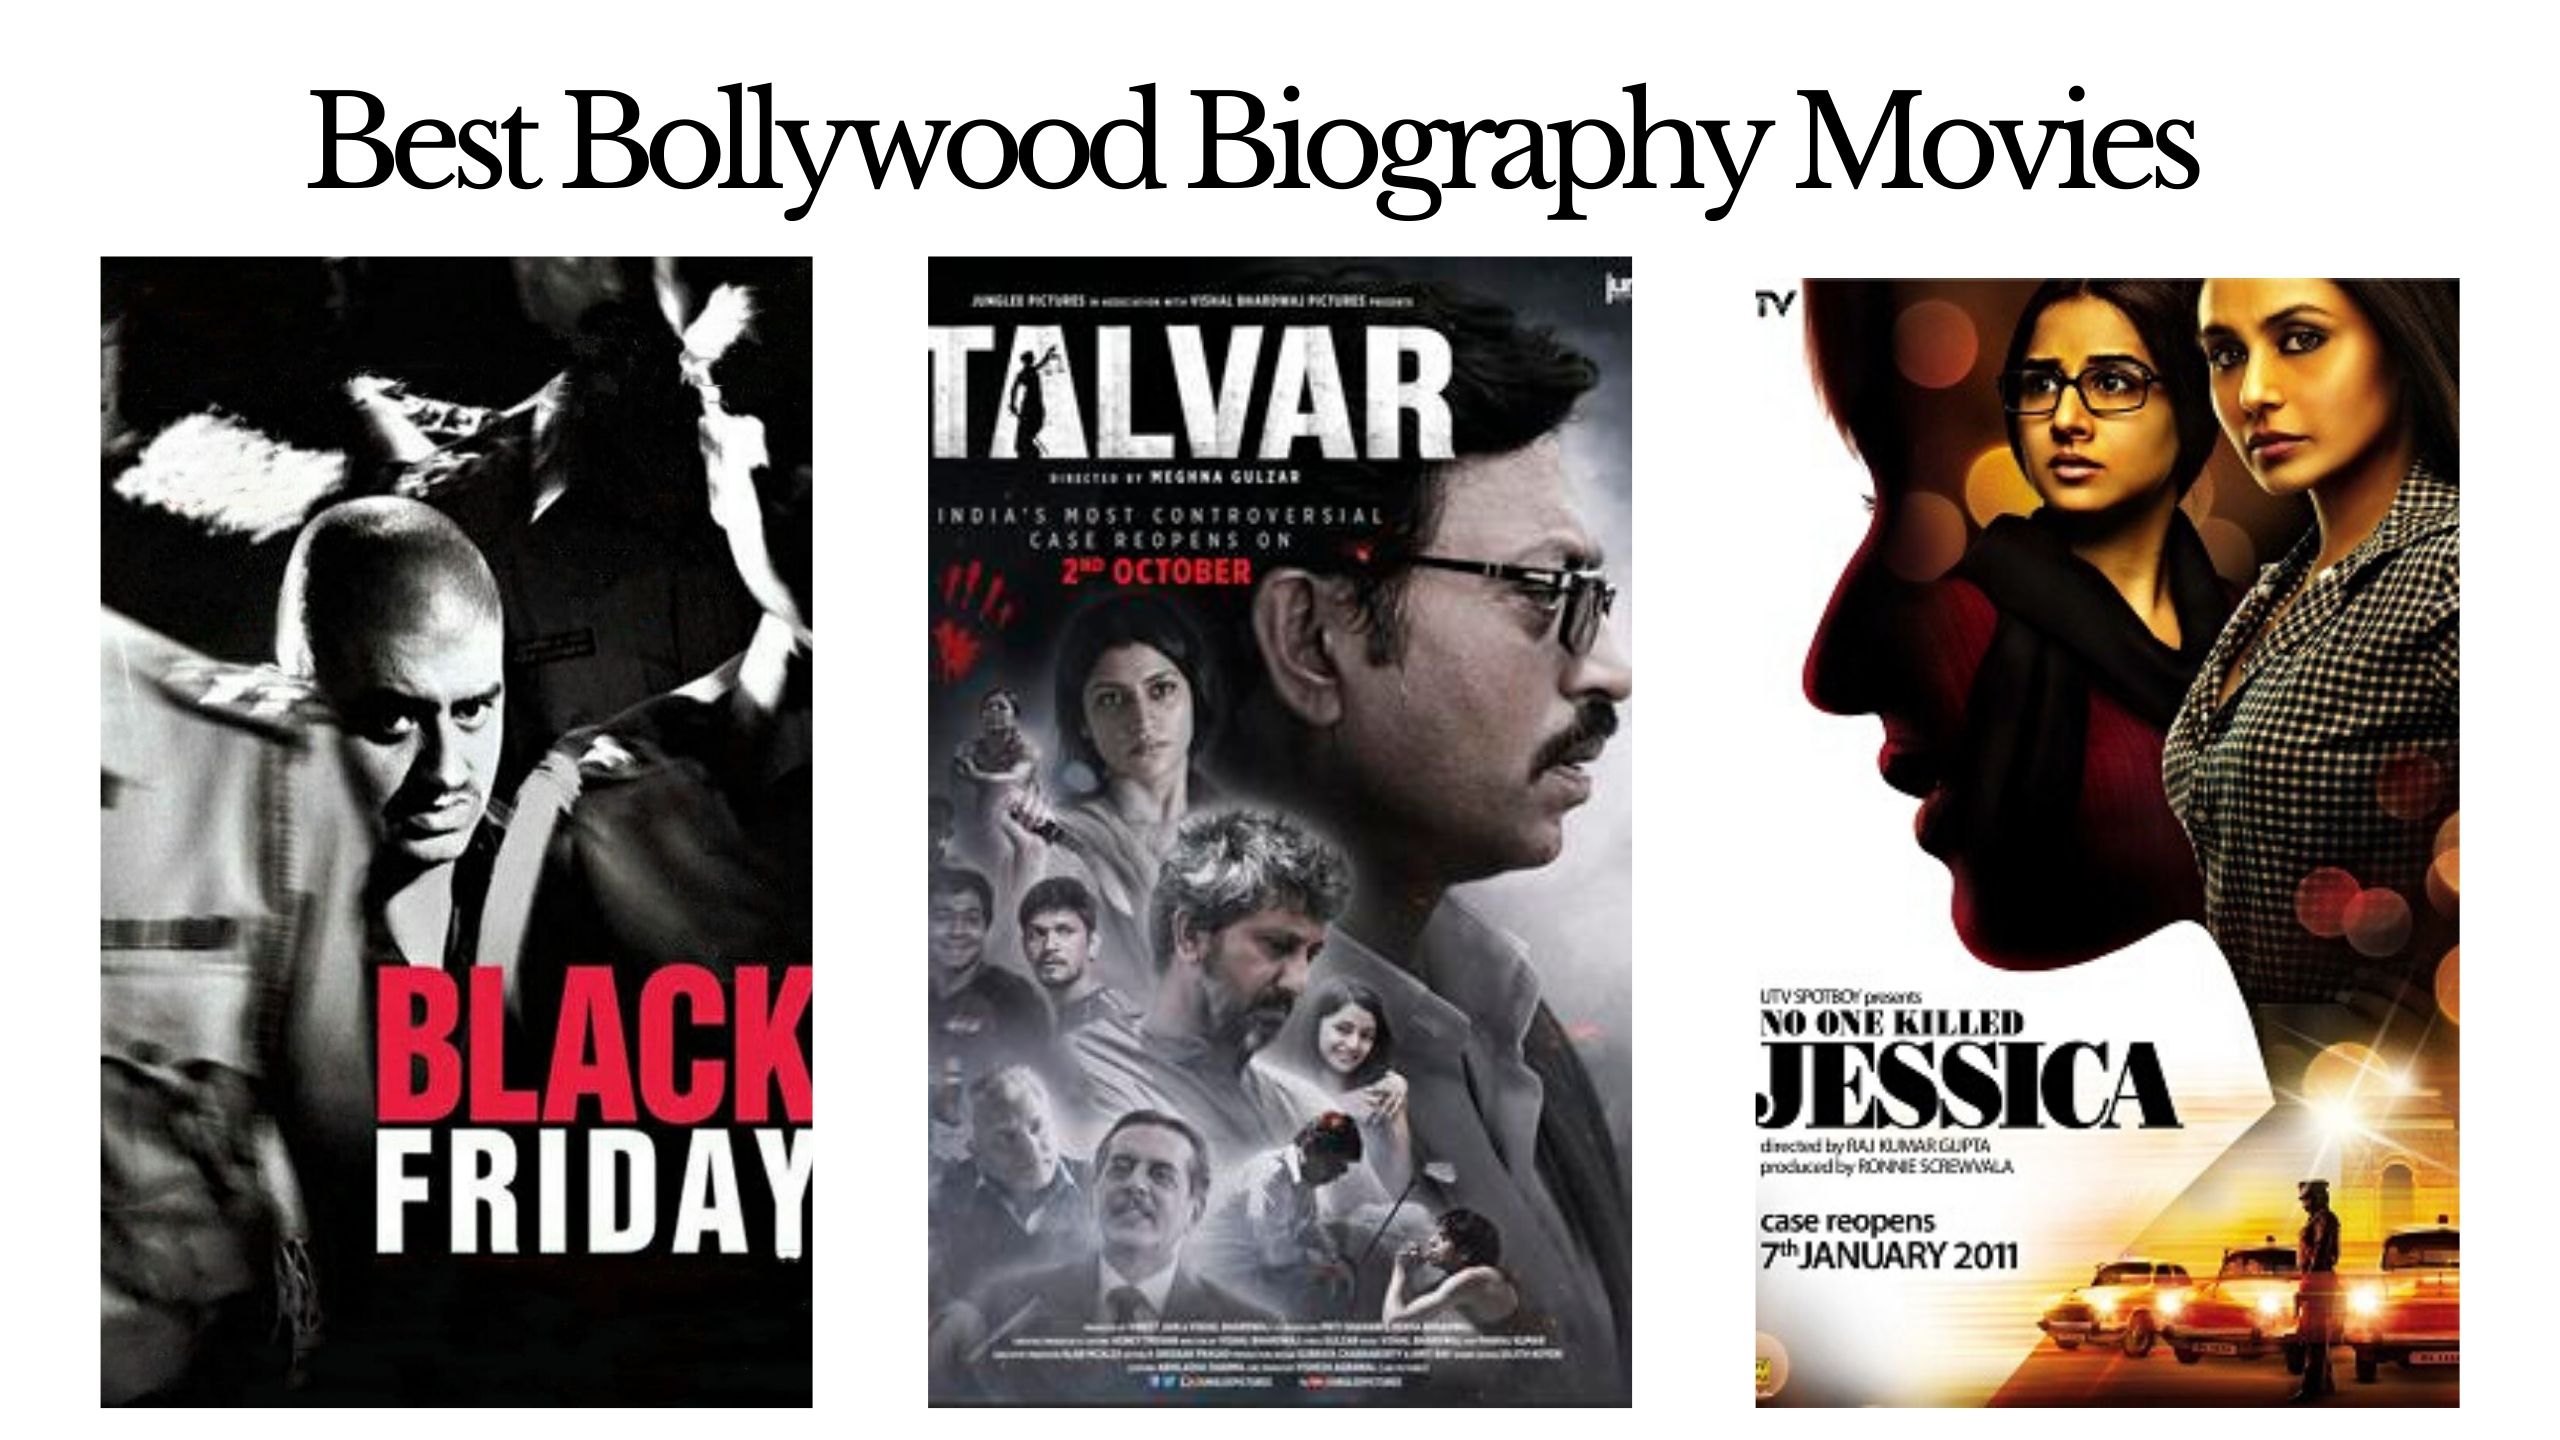 Best 3 Bollywood Biography Movies